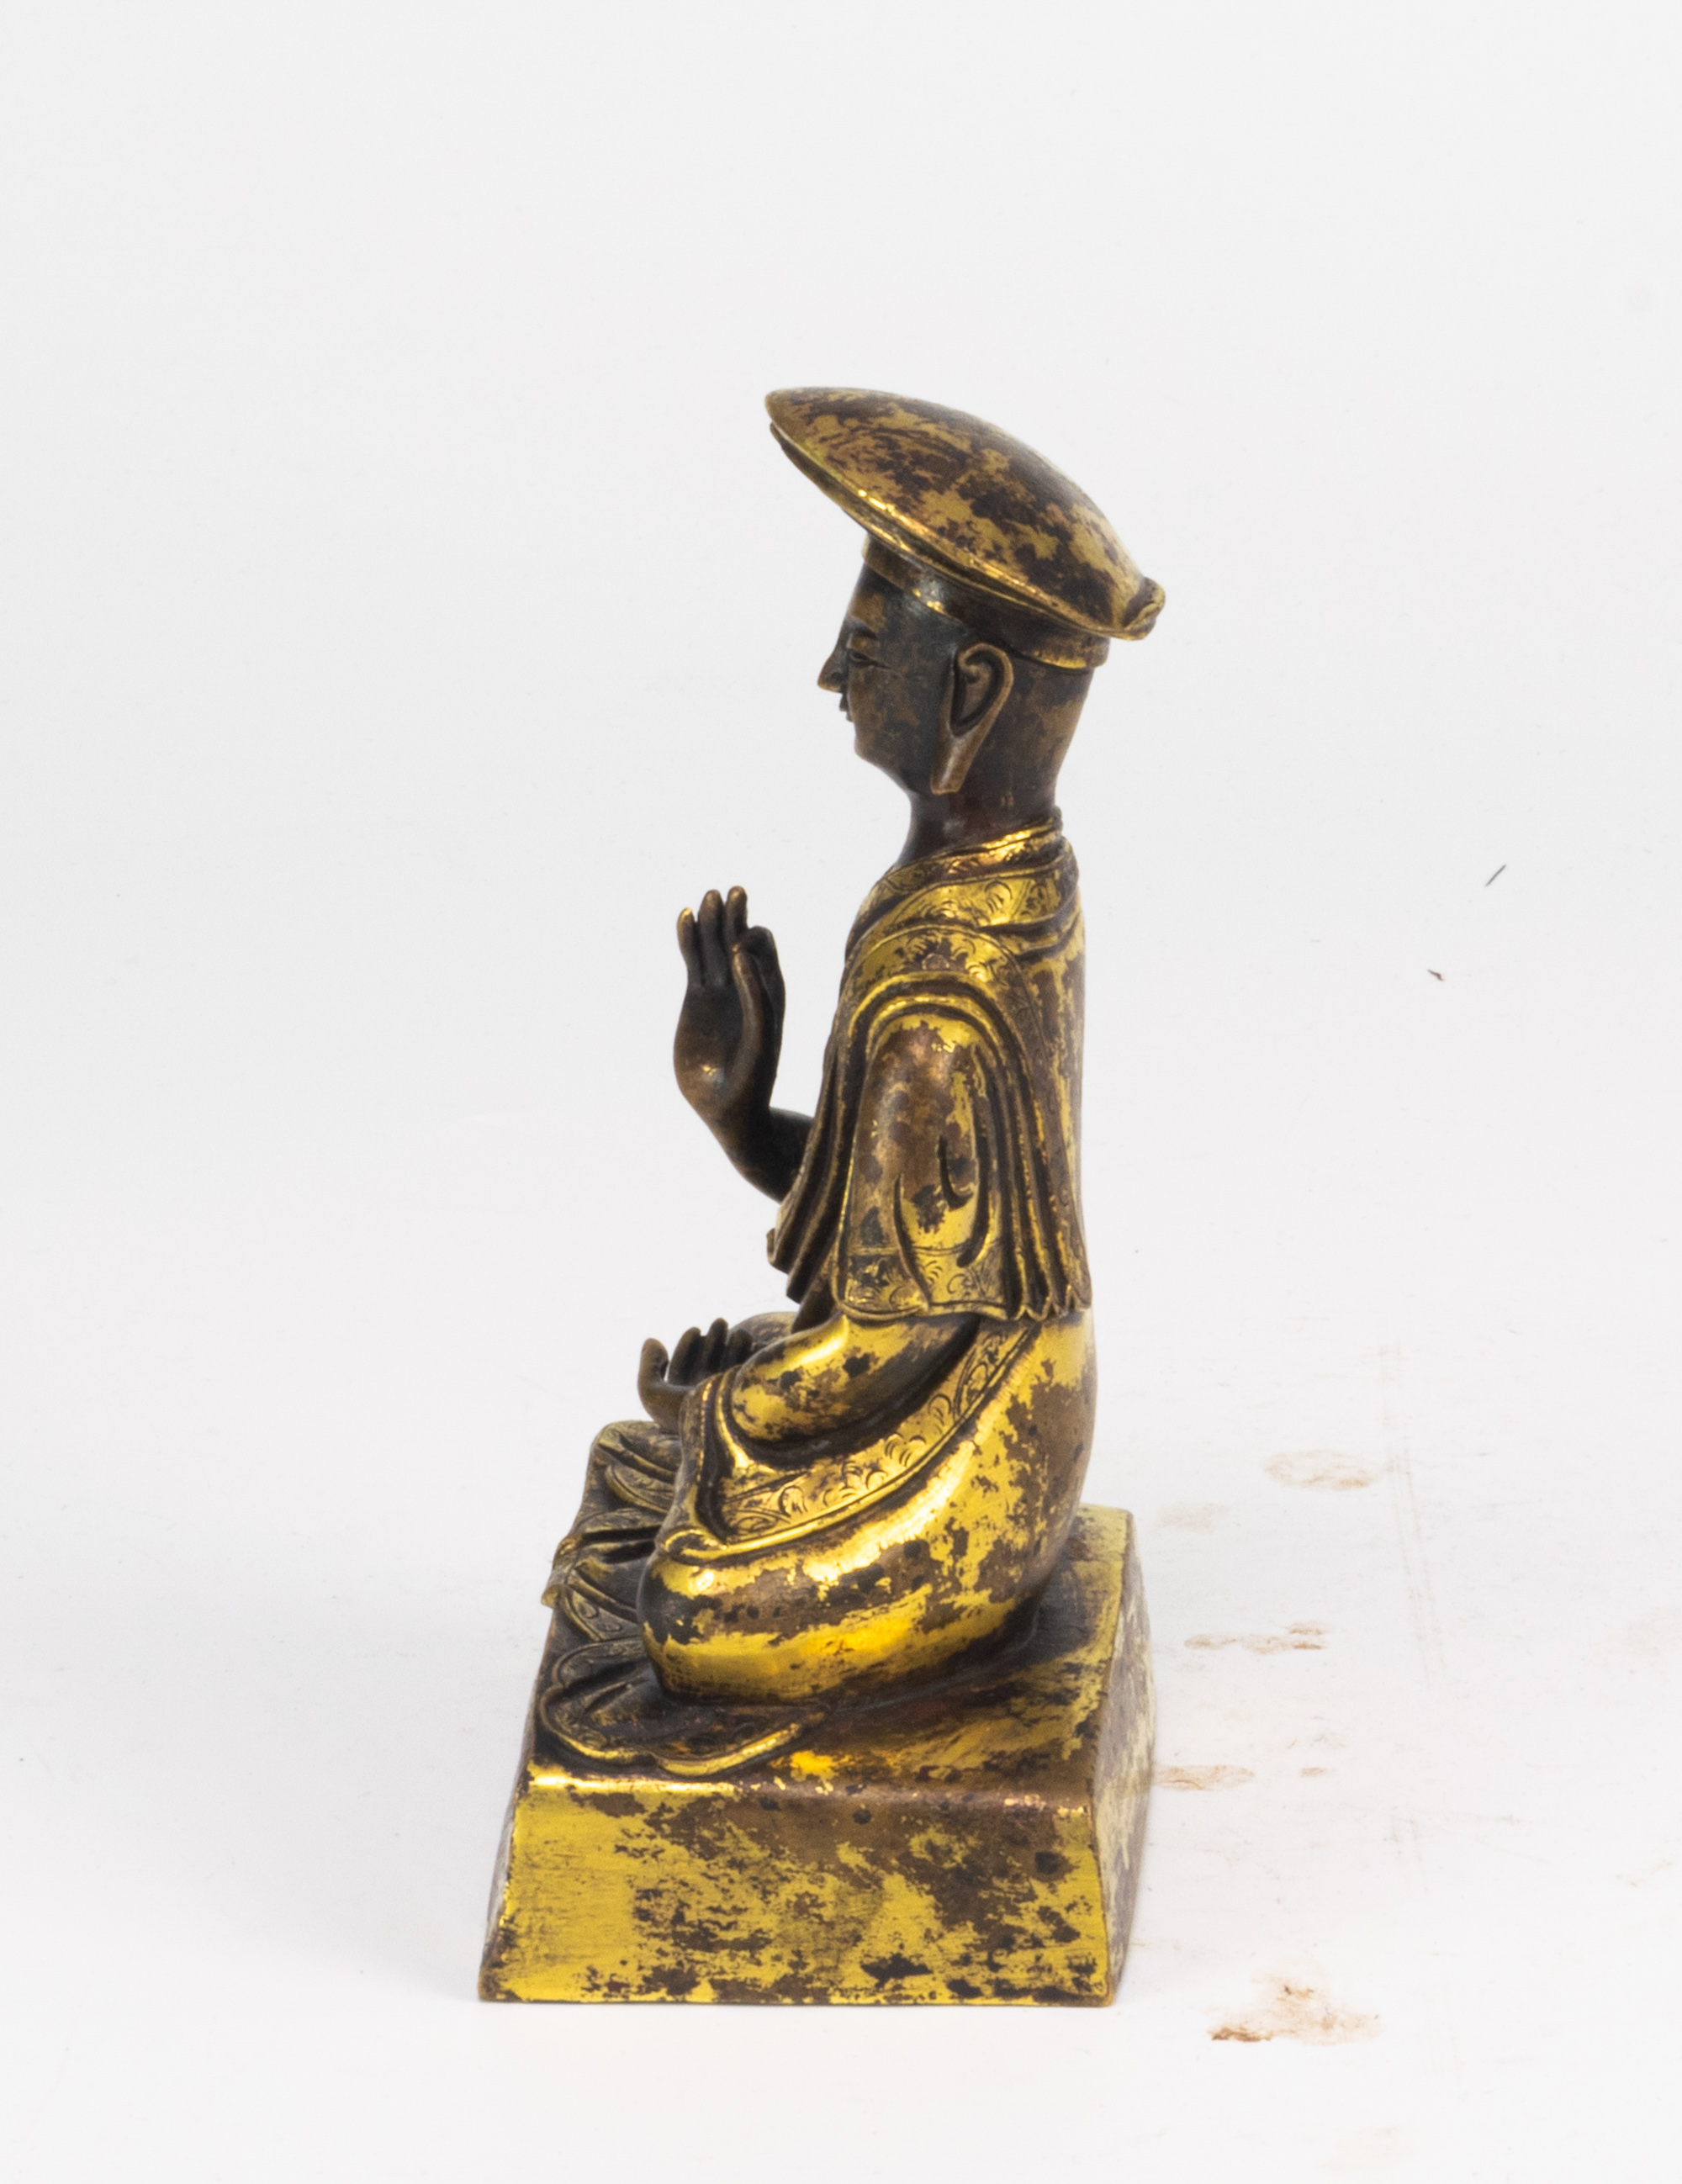 Chinese Gilt Bronze Figure of Lama, Qing Dynasty - Image 4 of 8